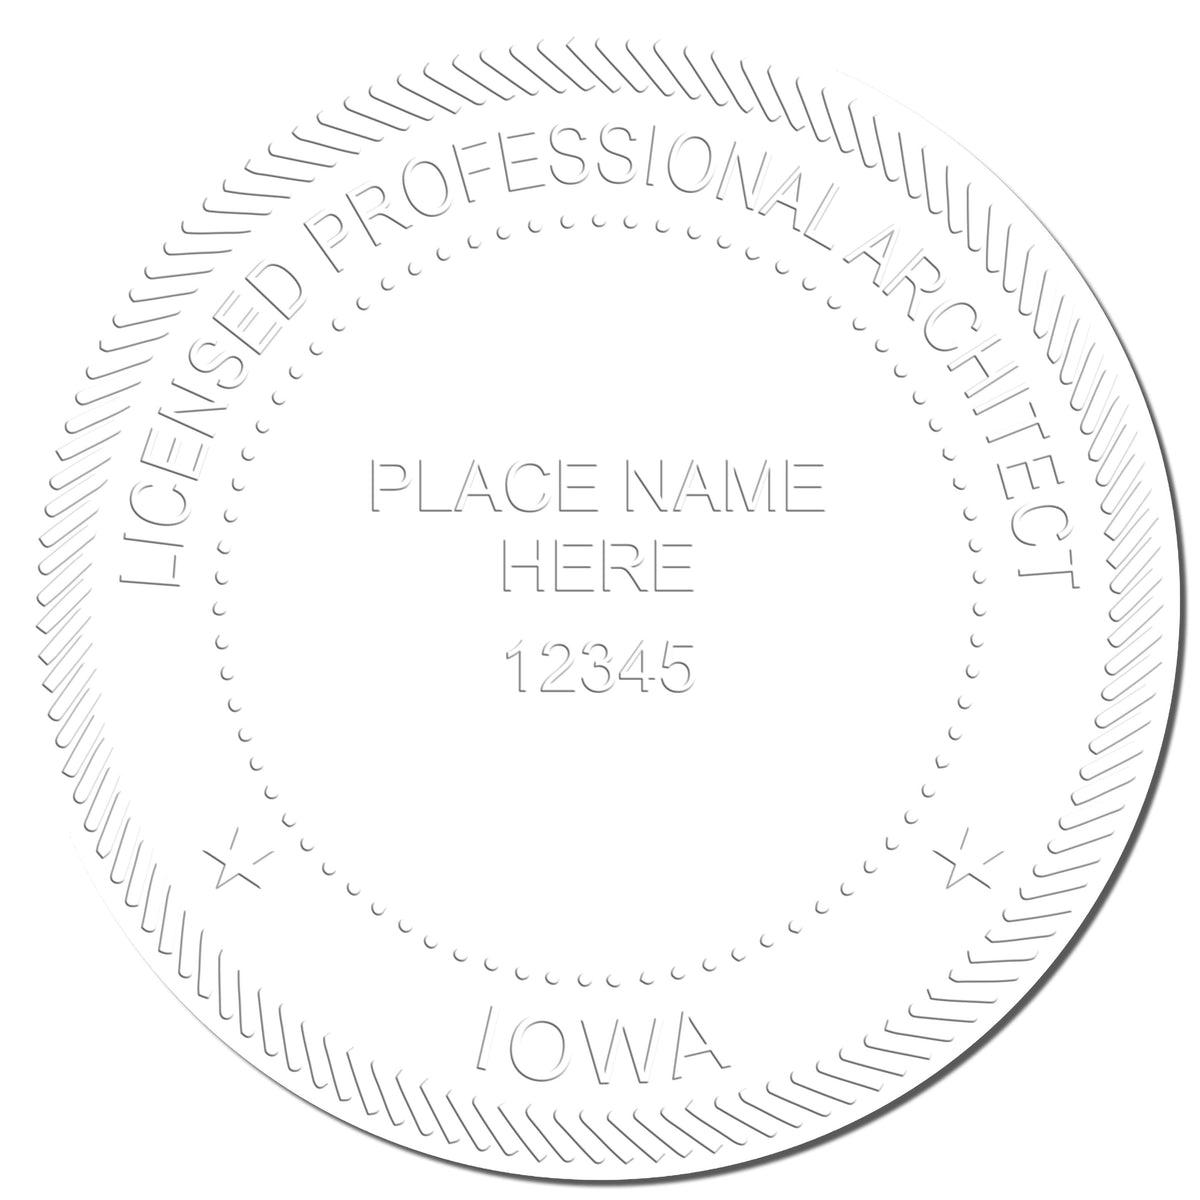 A photograph of the Iowa Desk Architect Embossing Seal stamp impression reveals a vivid, professional image of the on paper.